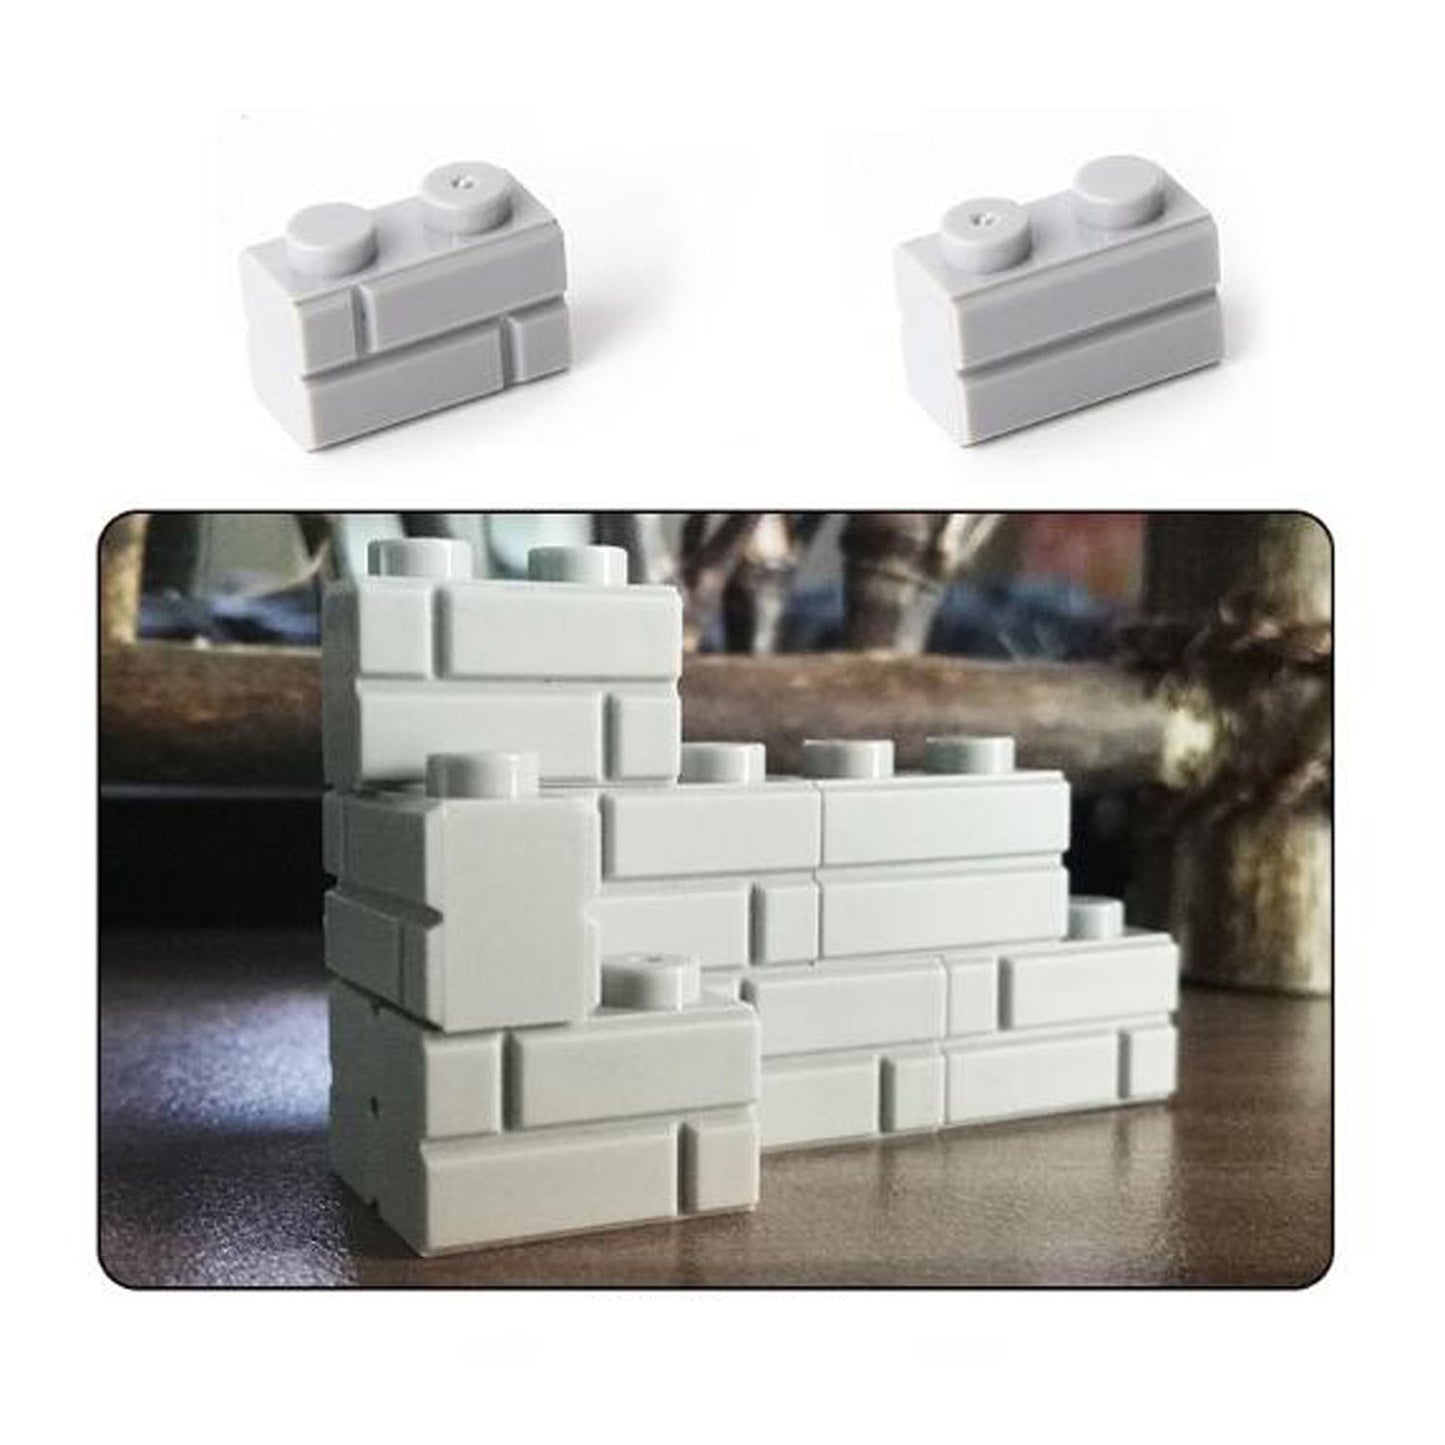 Military Building Blocks Accessories Pack, Guns & Weapons, Sandbags, Wardogs, Wall Pieces, Vests Designed for LEG0s Custom Army Minifigures